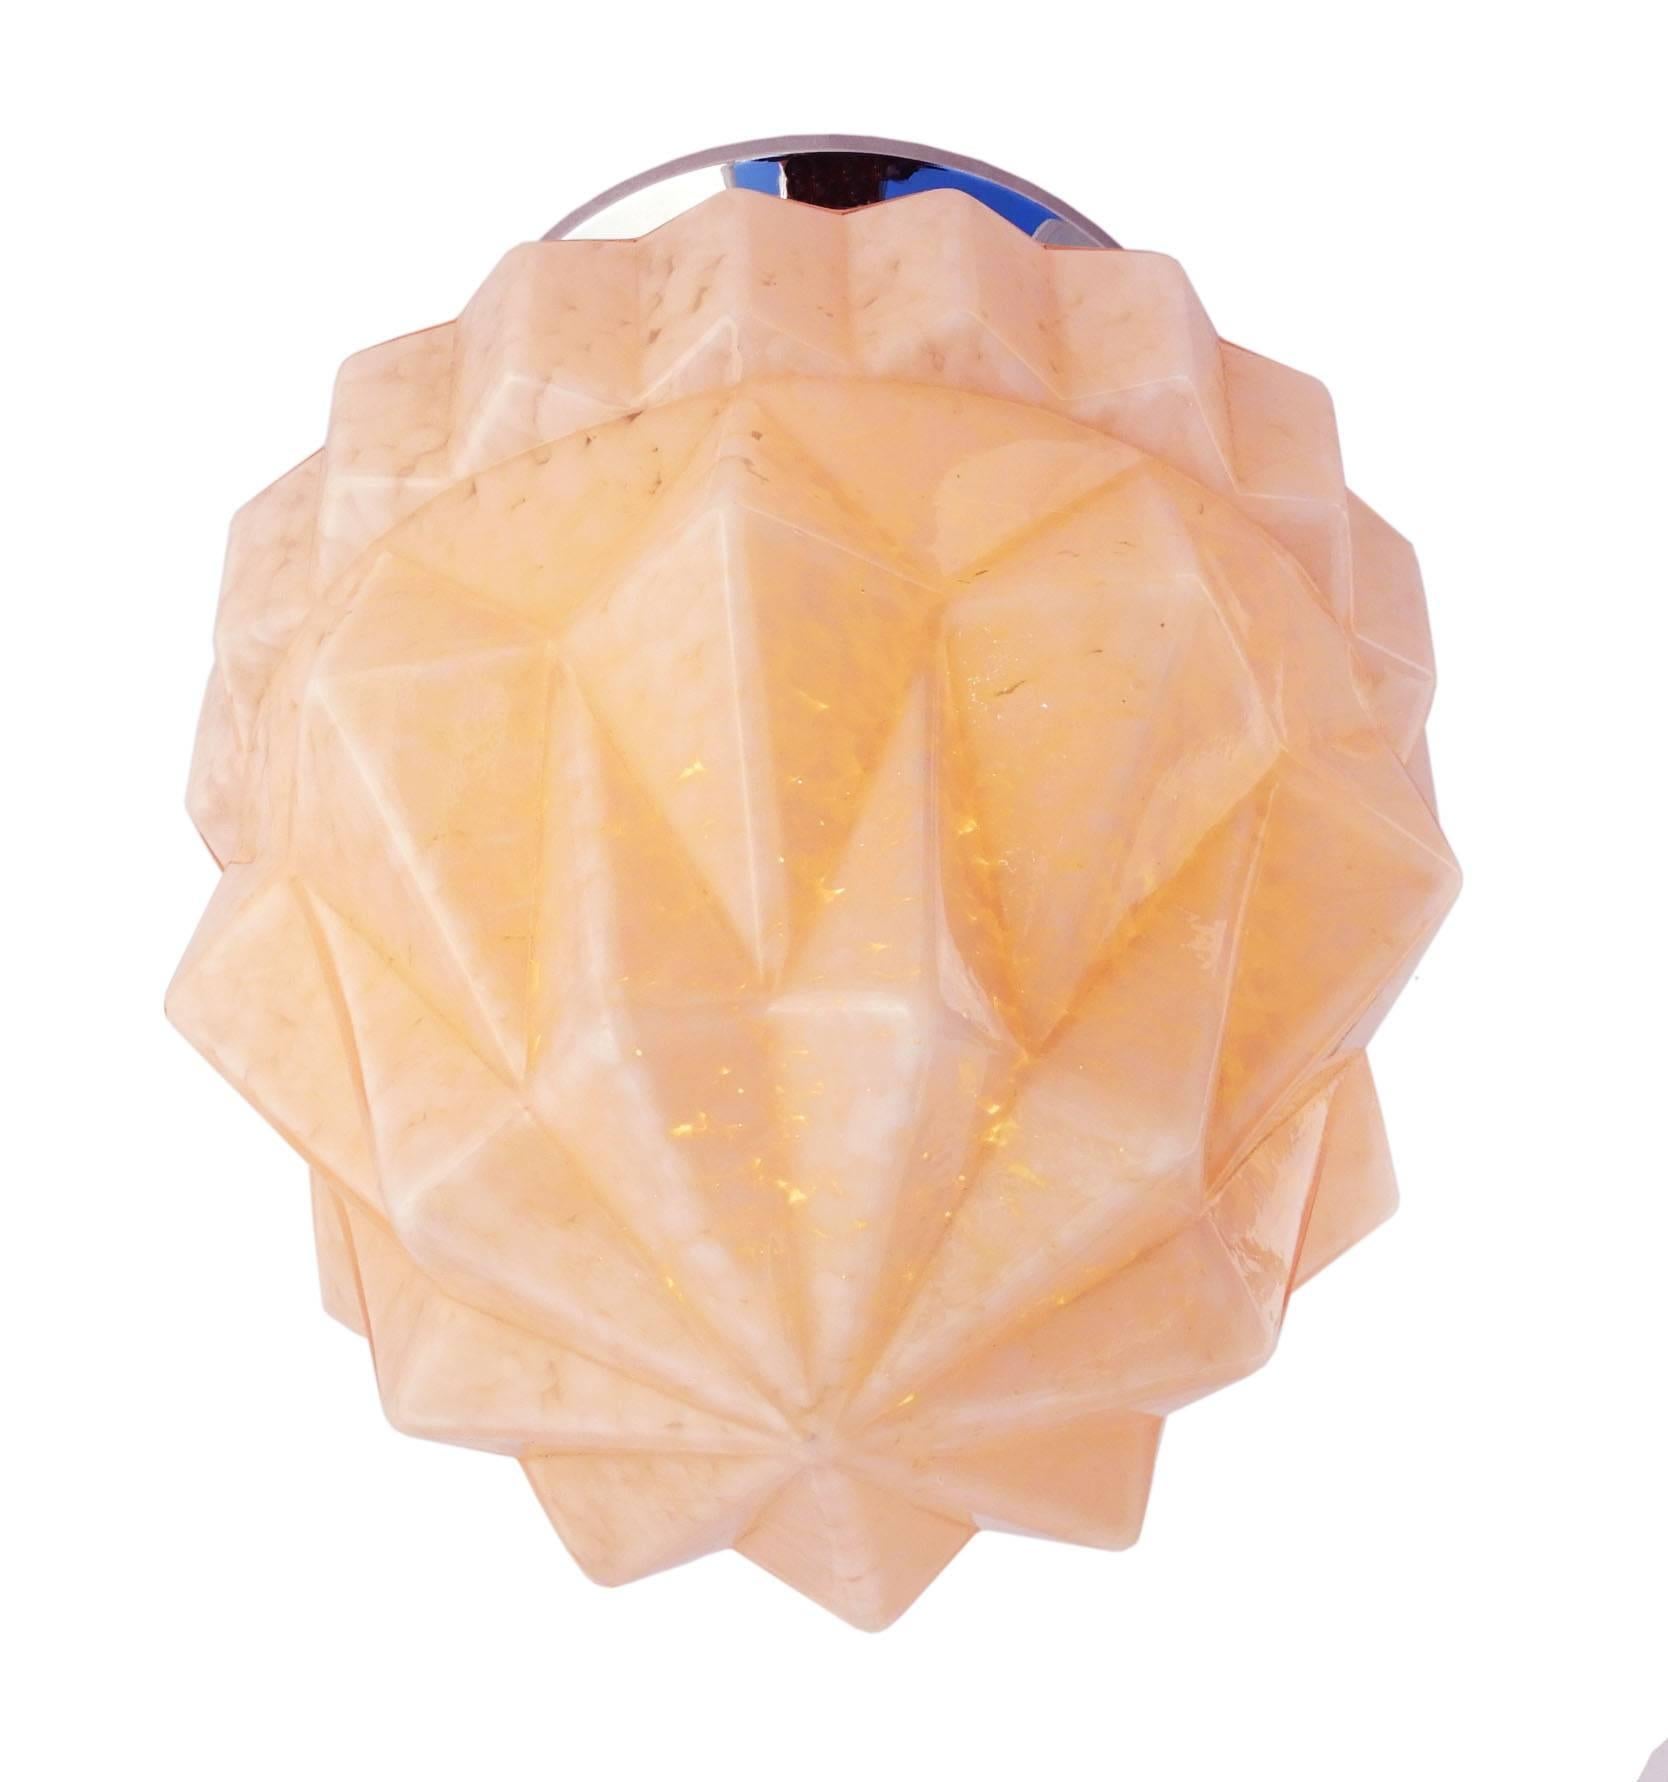 Stunning Art Deco Skyscraper light dusky pink mottled glass original shade on a chrome mount
We can customise this flush mount ceiling light for use as a desk light or as a pendant light.
In good original condition with no losses to glass.
This